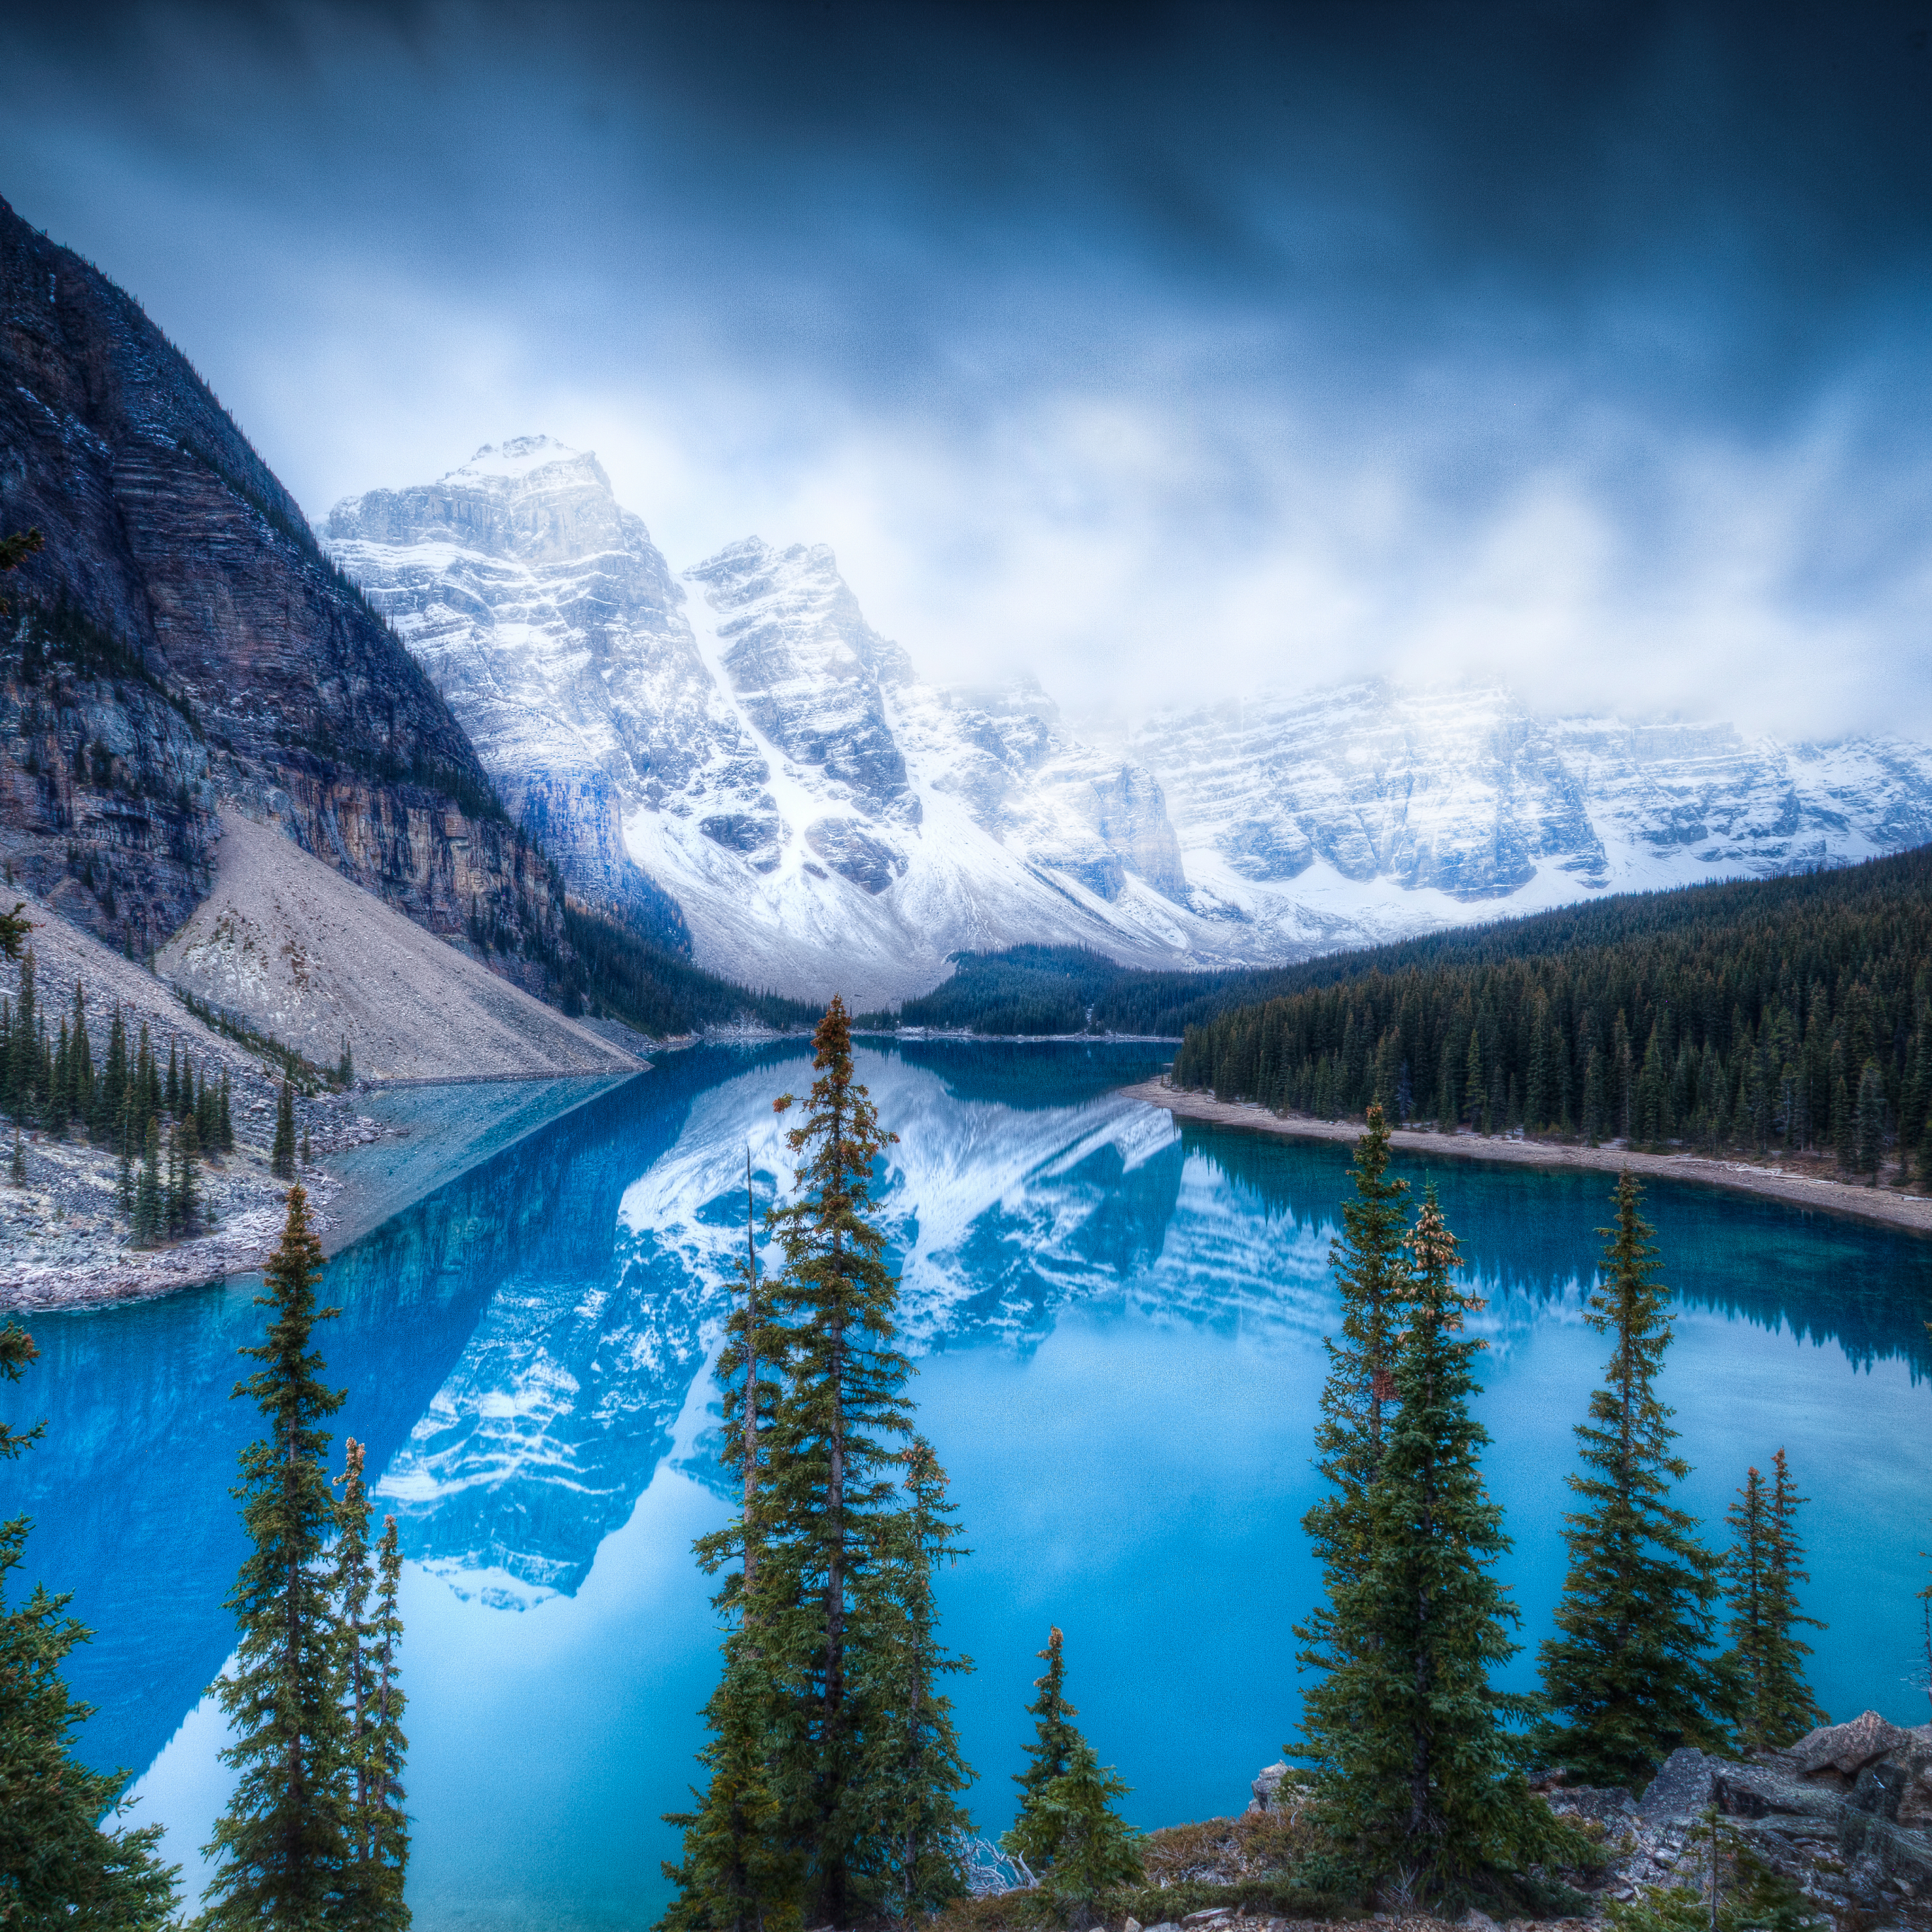 android valley of ten peaks, moraine lake, earth, banff national park, reflection, alberta, canadian rockies, canada, mountain, lake, lakes